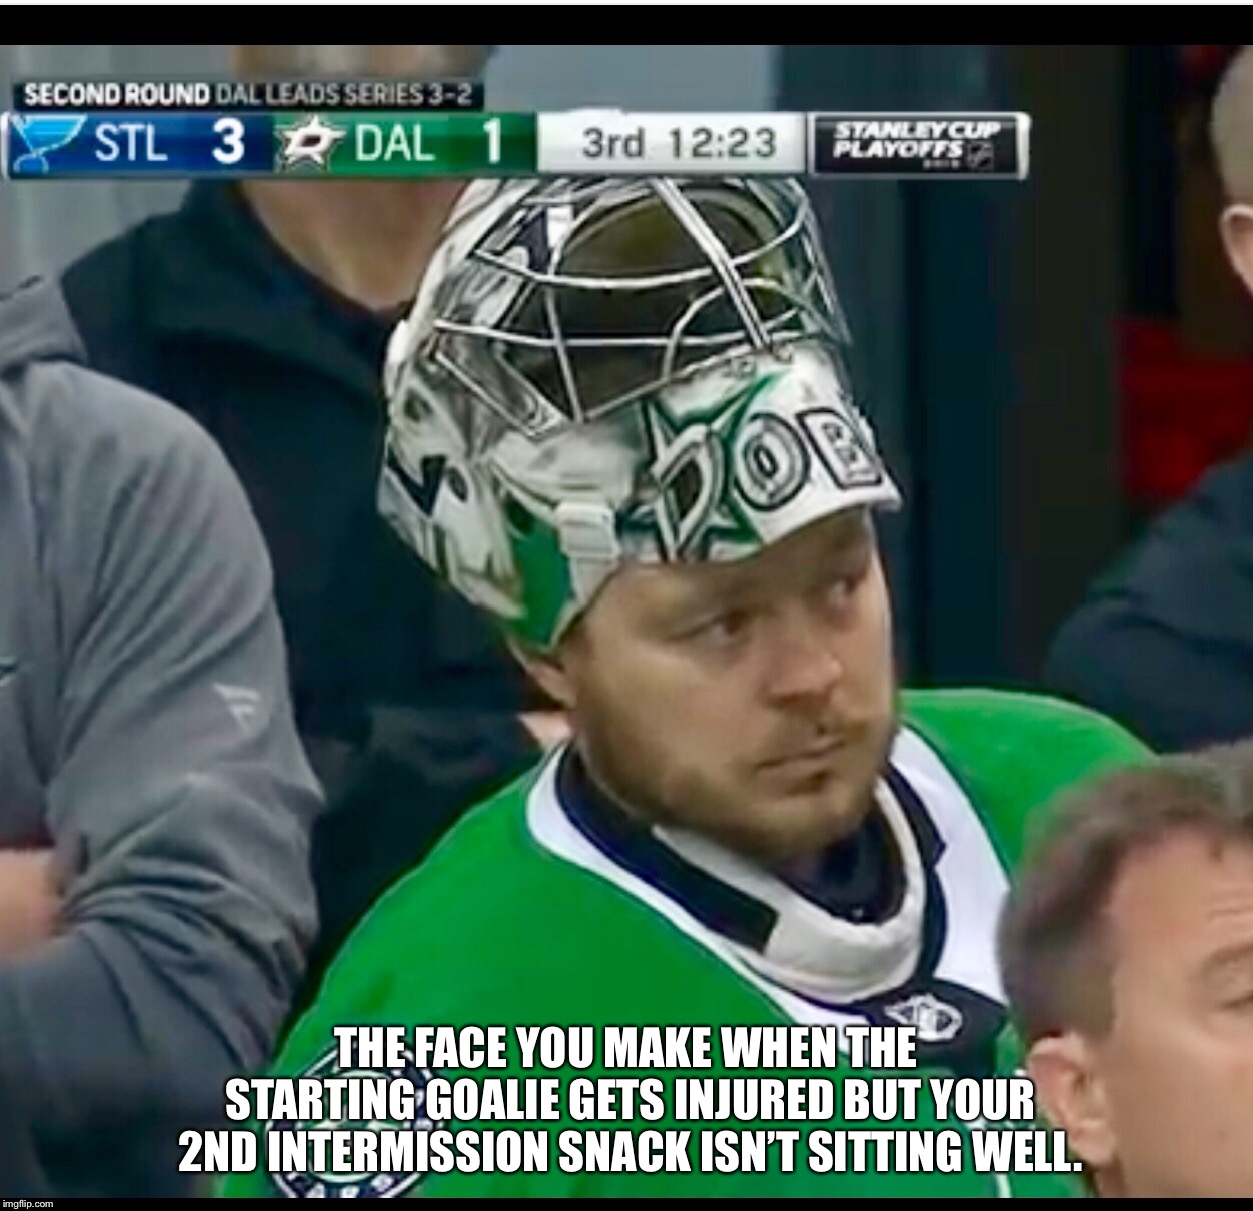 Goalie problems | THE FACE YOU MAKE WHEN THE STARTING GOALIE GETS INJURED BUT YOUR 2ND INTERMISSION SNACK ISN’T SITTING WELL. | image tagged in goalie,sports | made w/ Imgflip meme maker